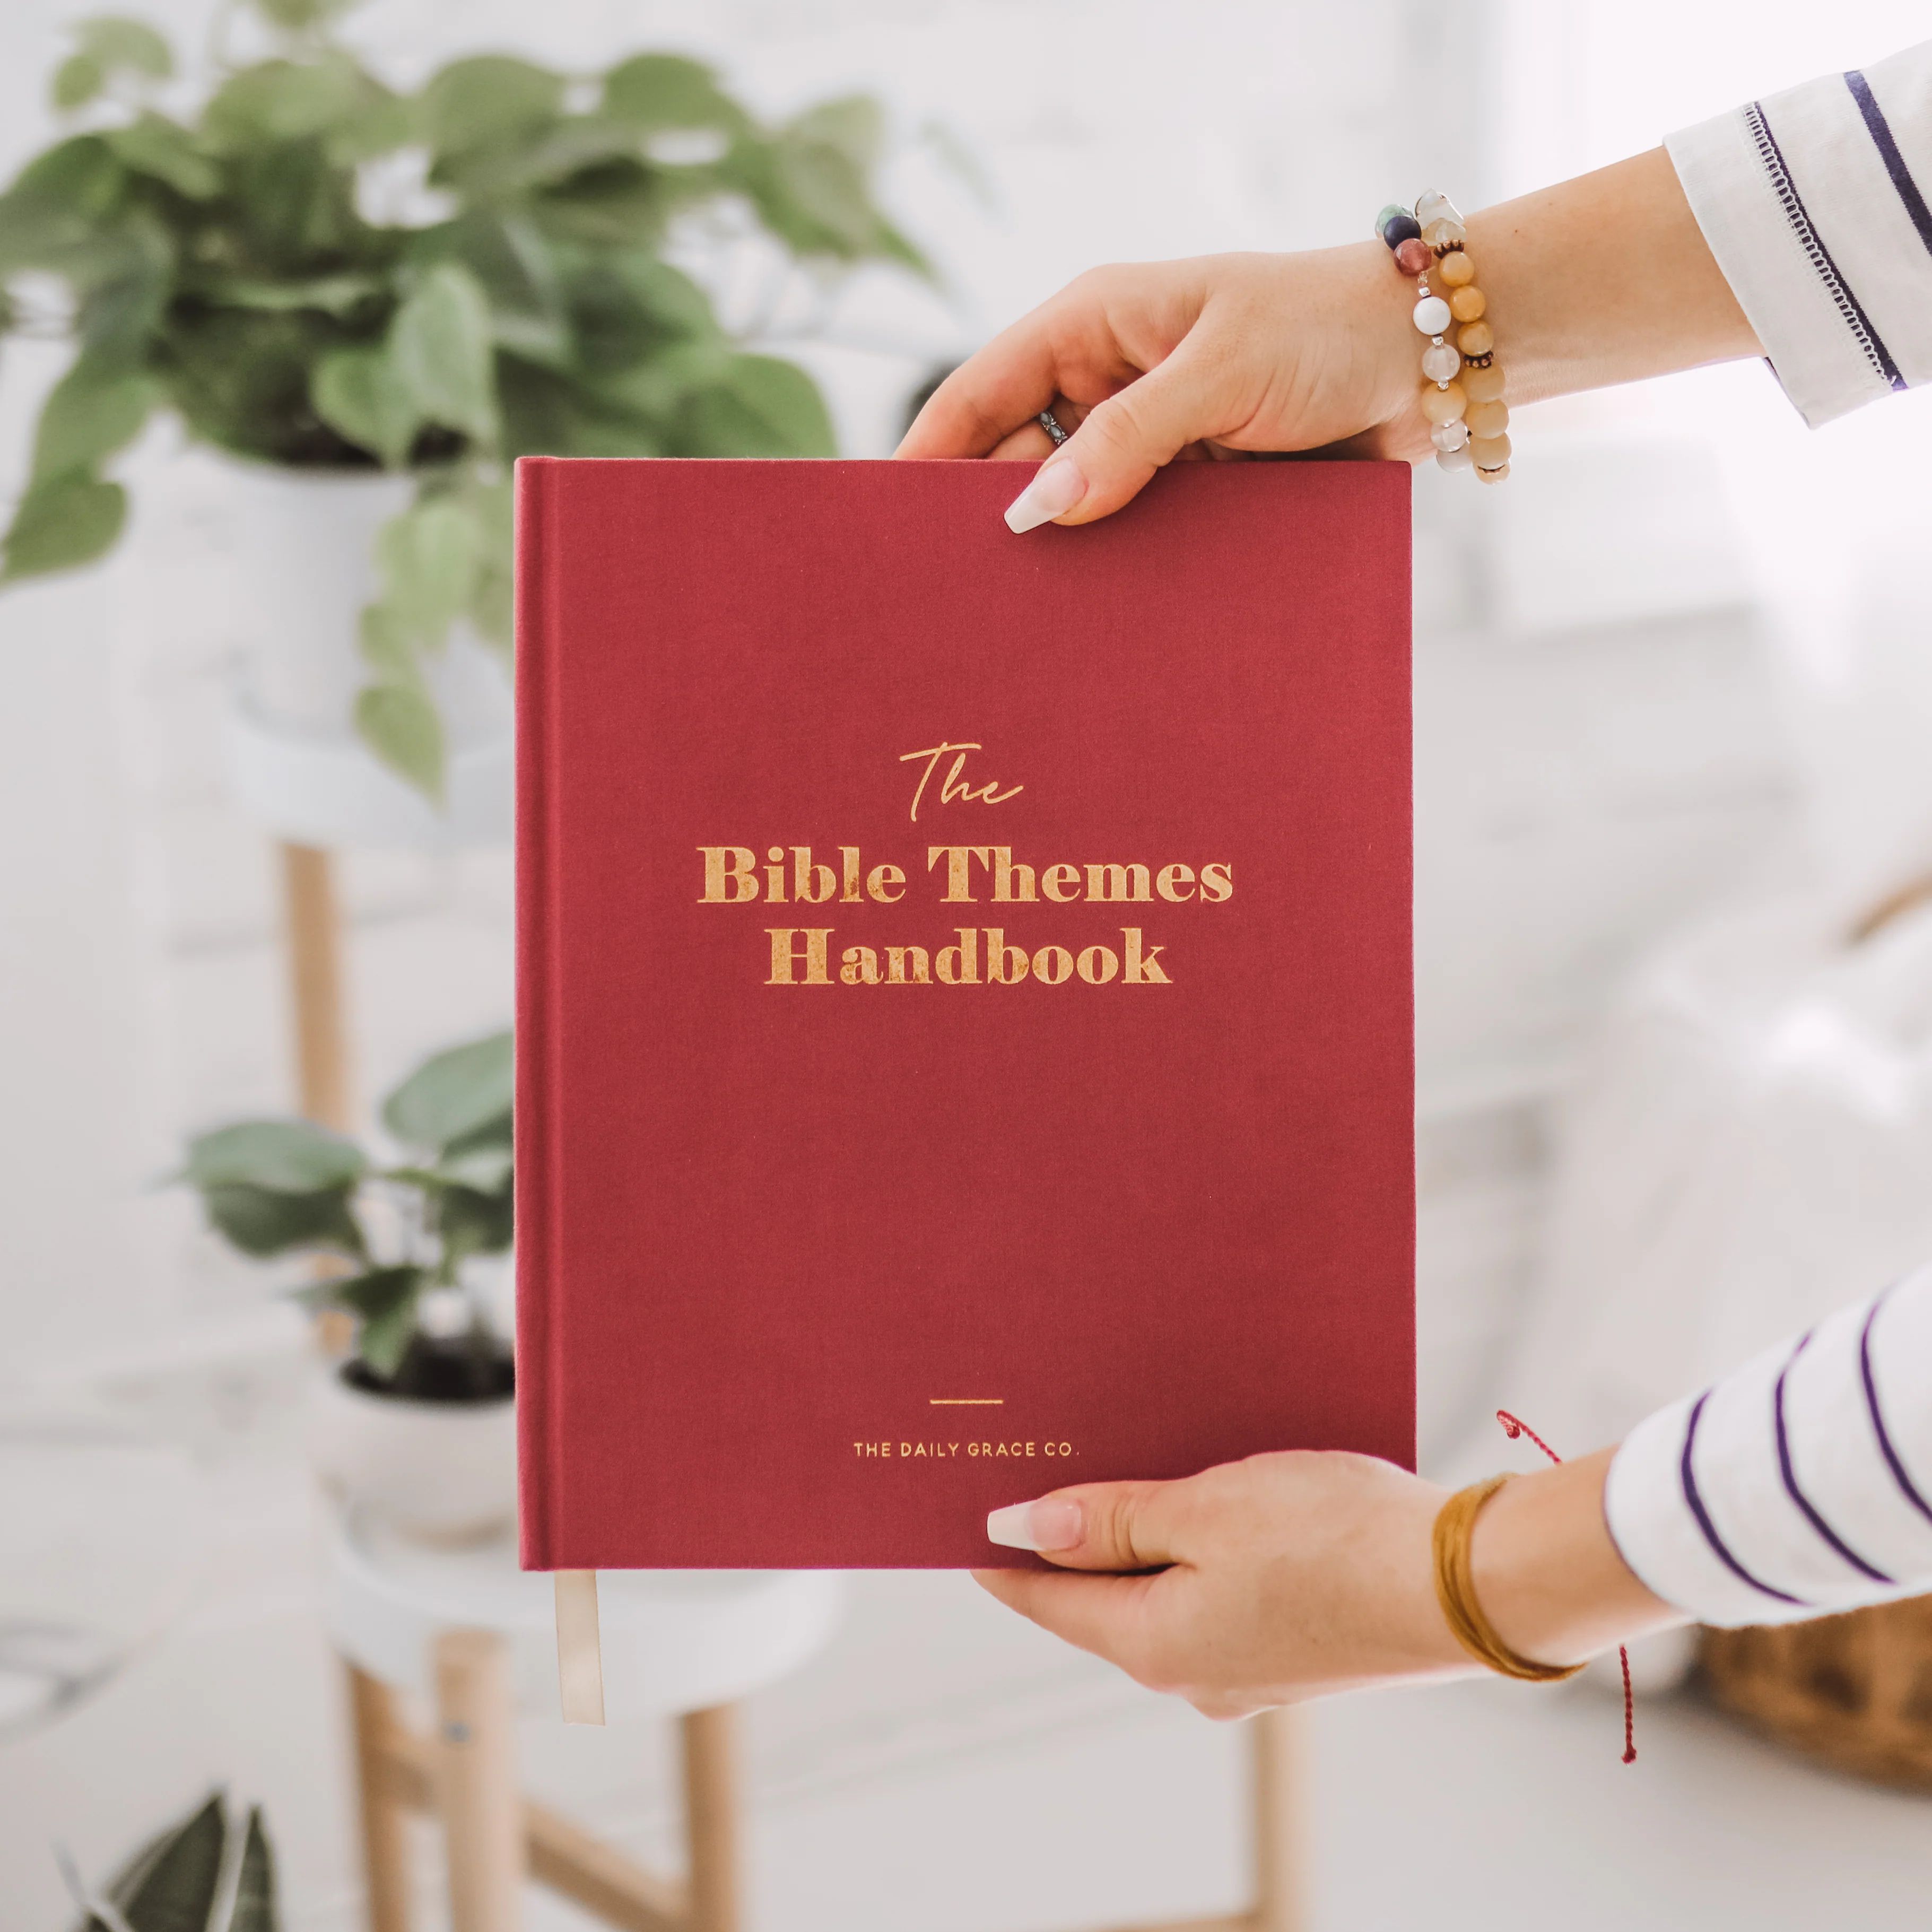 The Bible Themes Handbook | The Daily Grace Co.